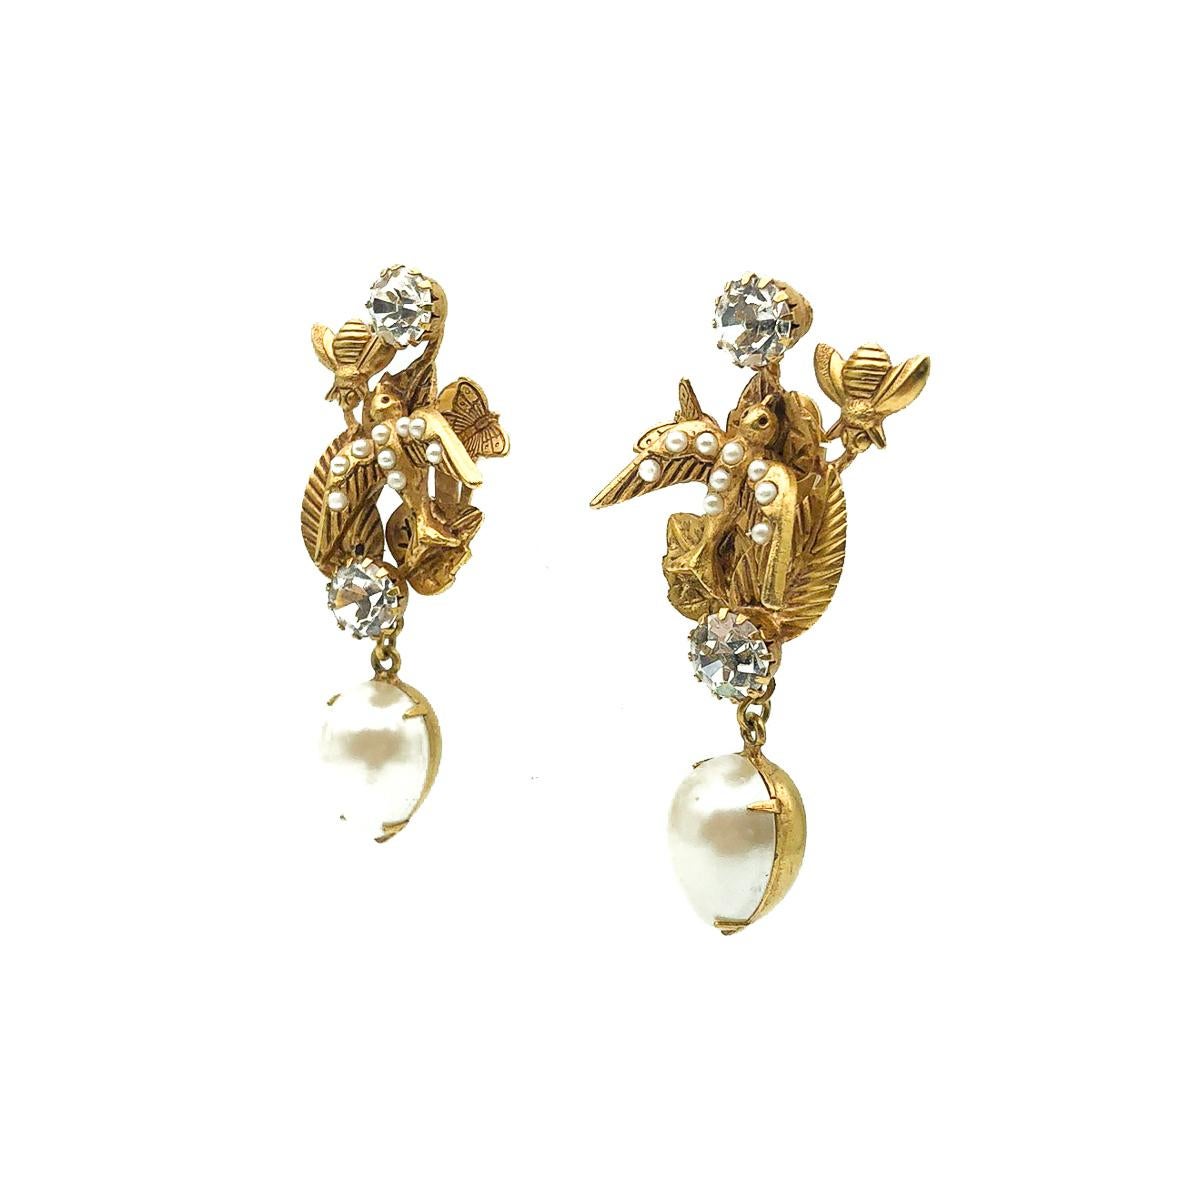 Beautiful vintage Askew Swallow & Bee earrings. Featuring wonderfully detailed work depicting a garden style array including an adorable swallow and bee motif. 
Vintage Condition: Very good without damage or noteworthy wear. 
Materials: Gold plated